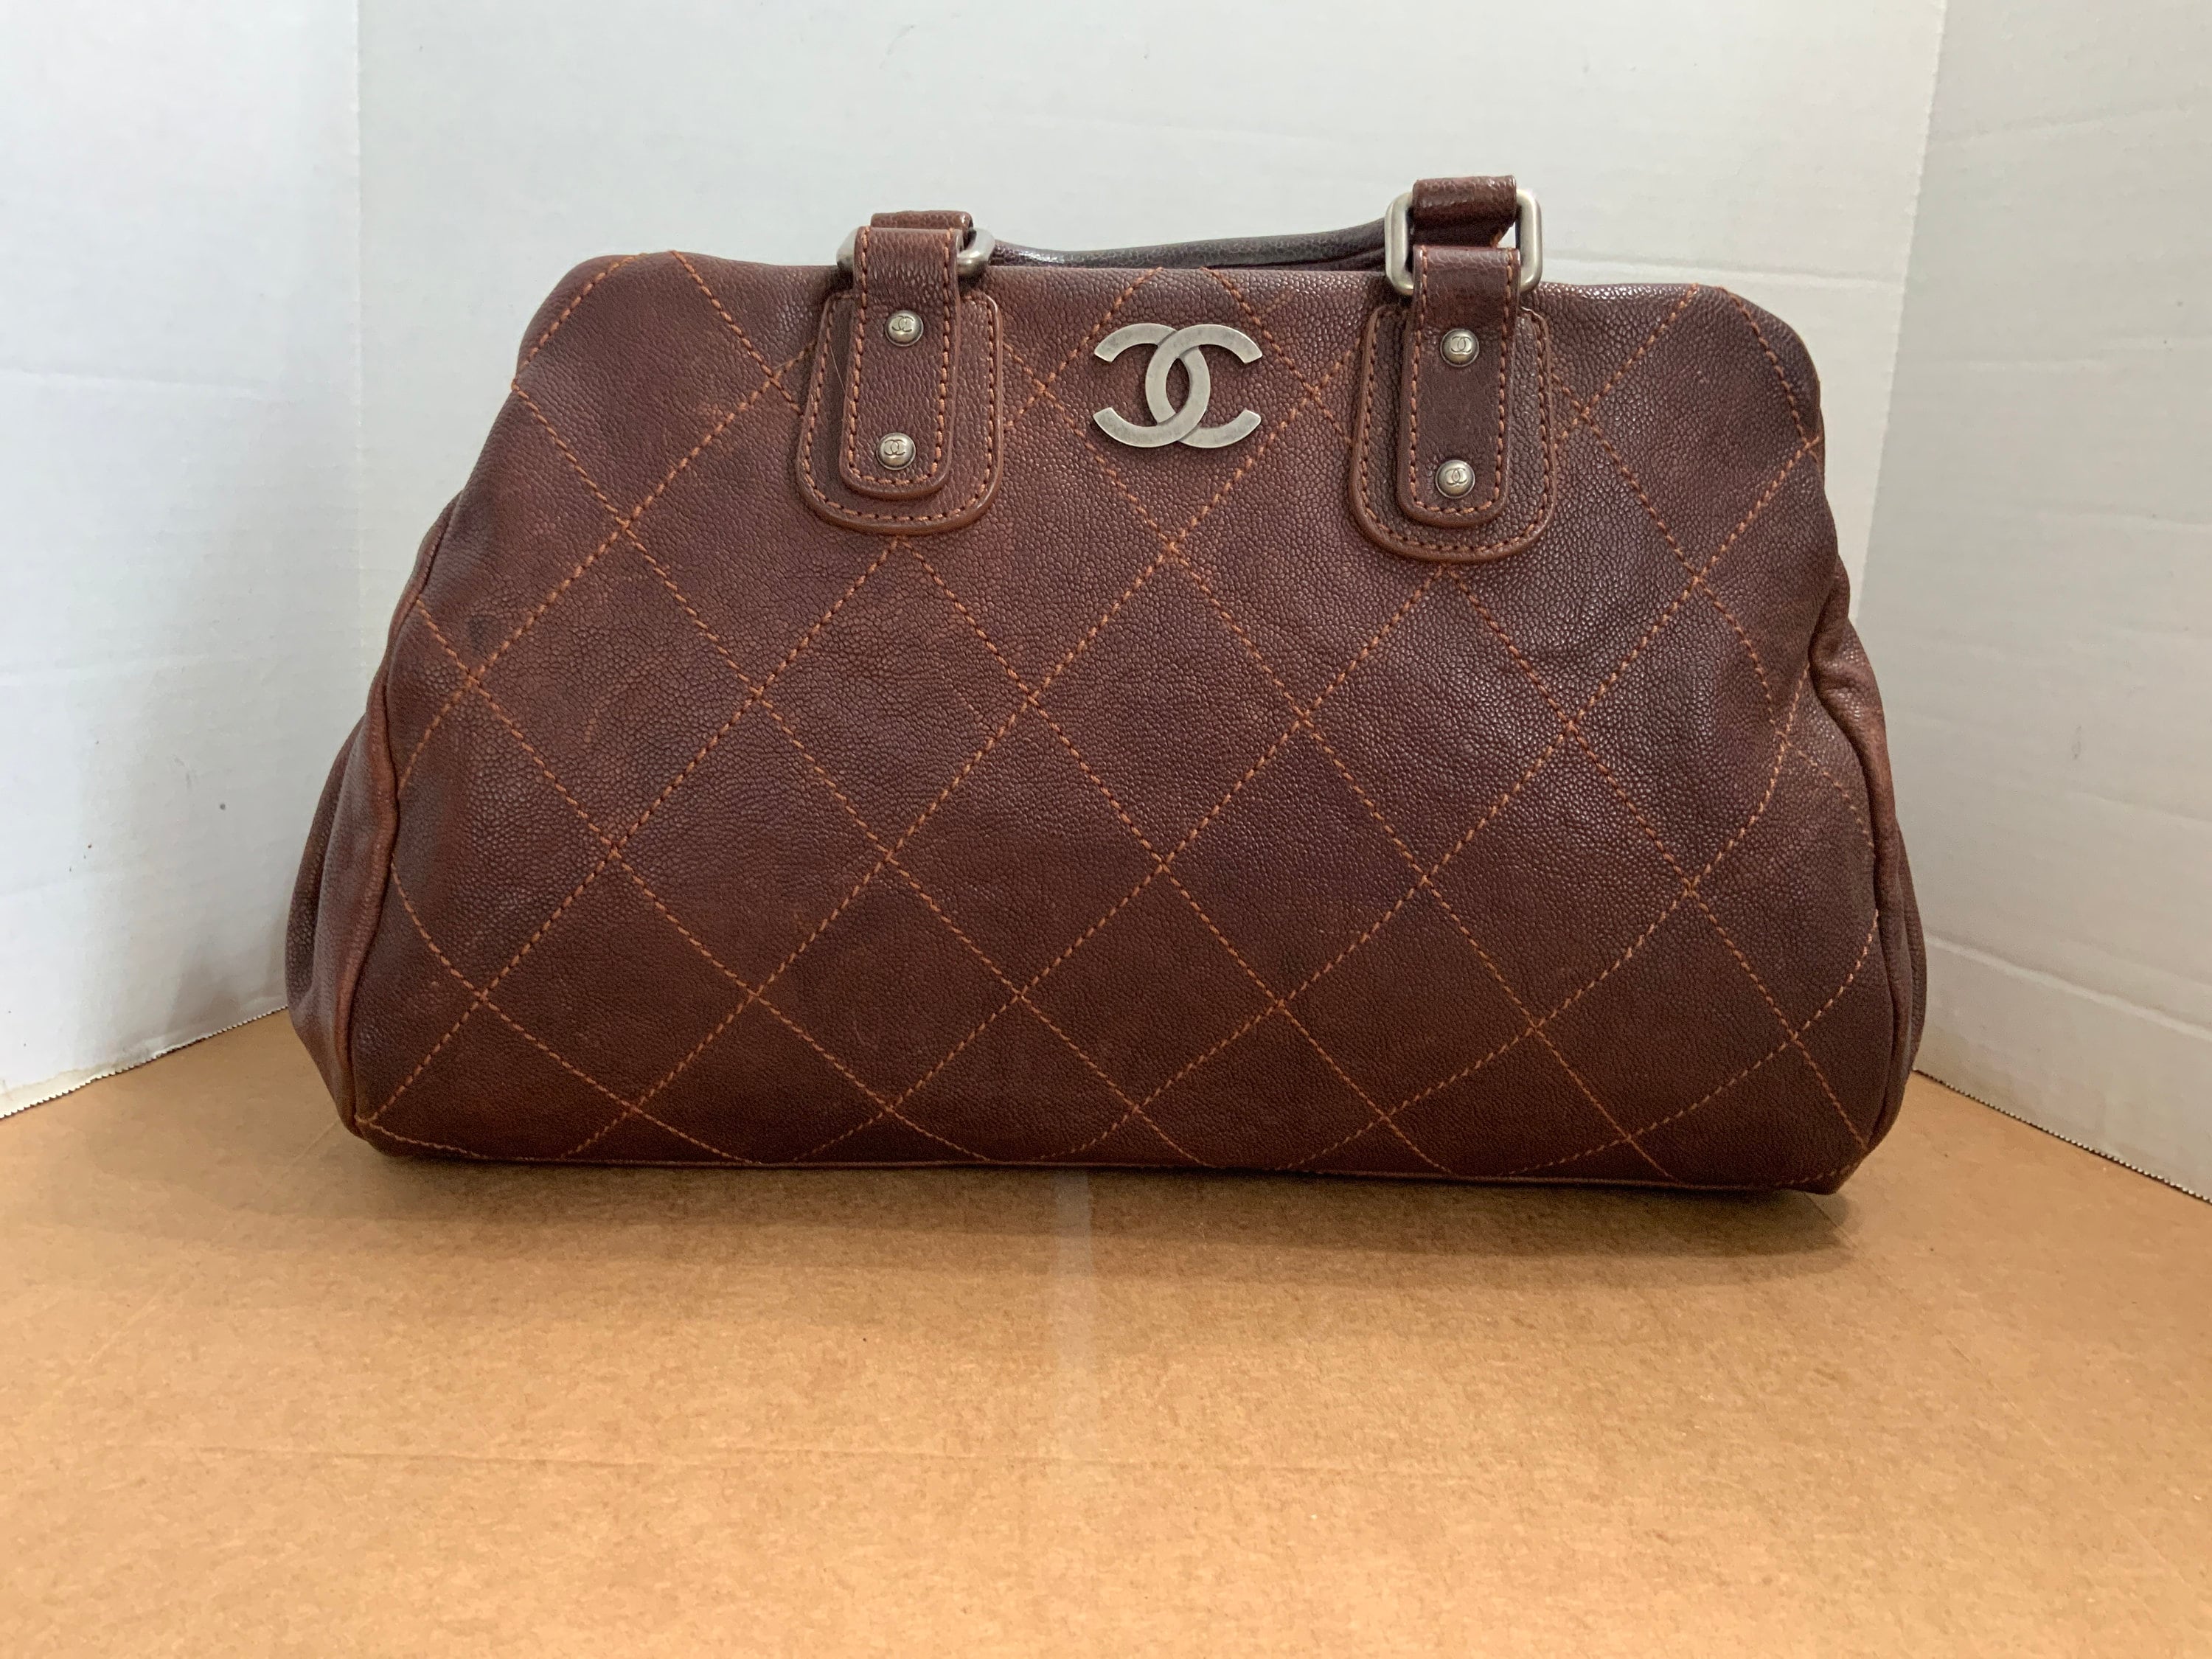 CHANEL, Bags, Chanel Doctor Bag Excellent Condition